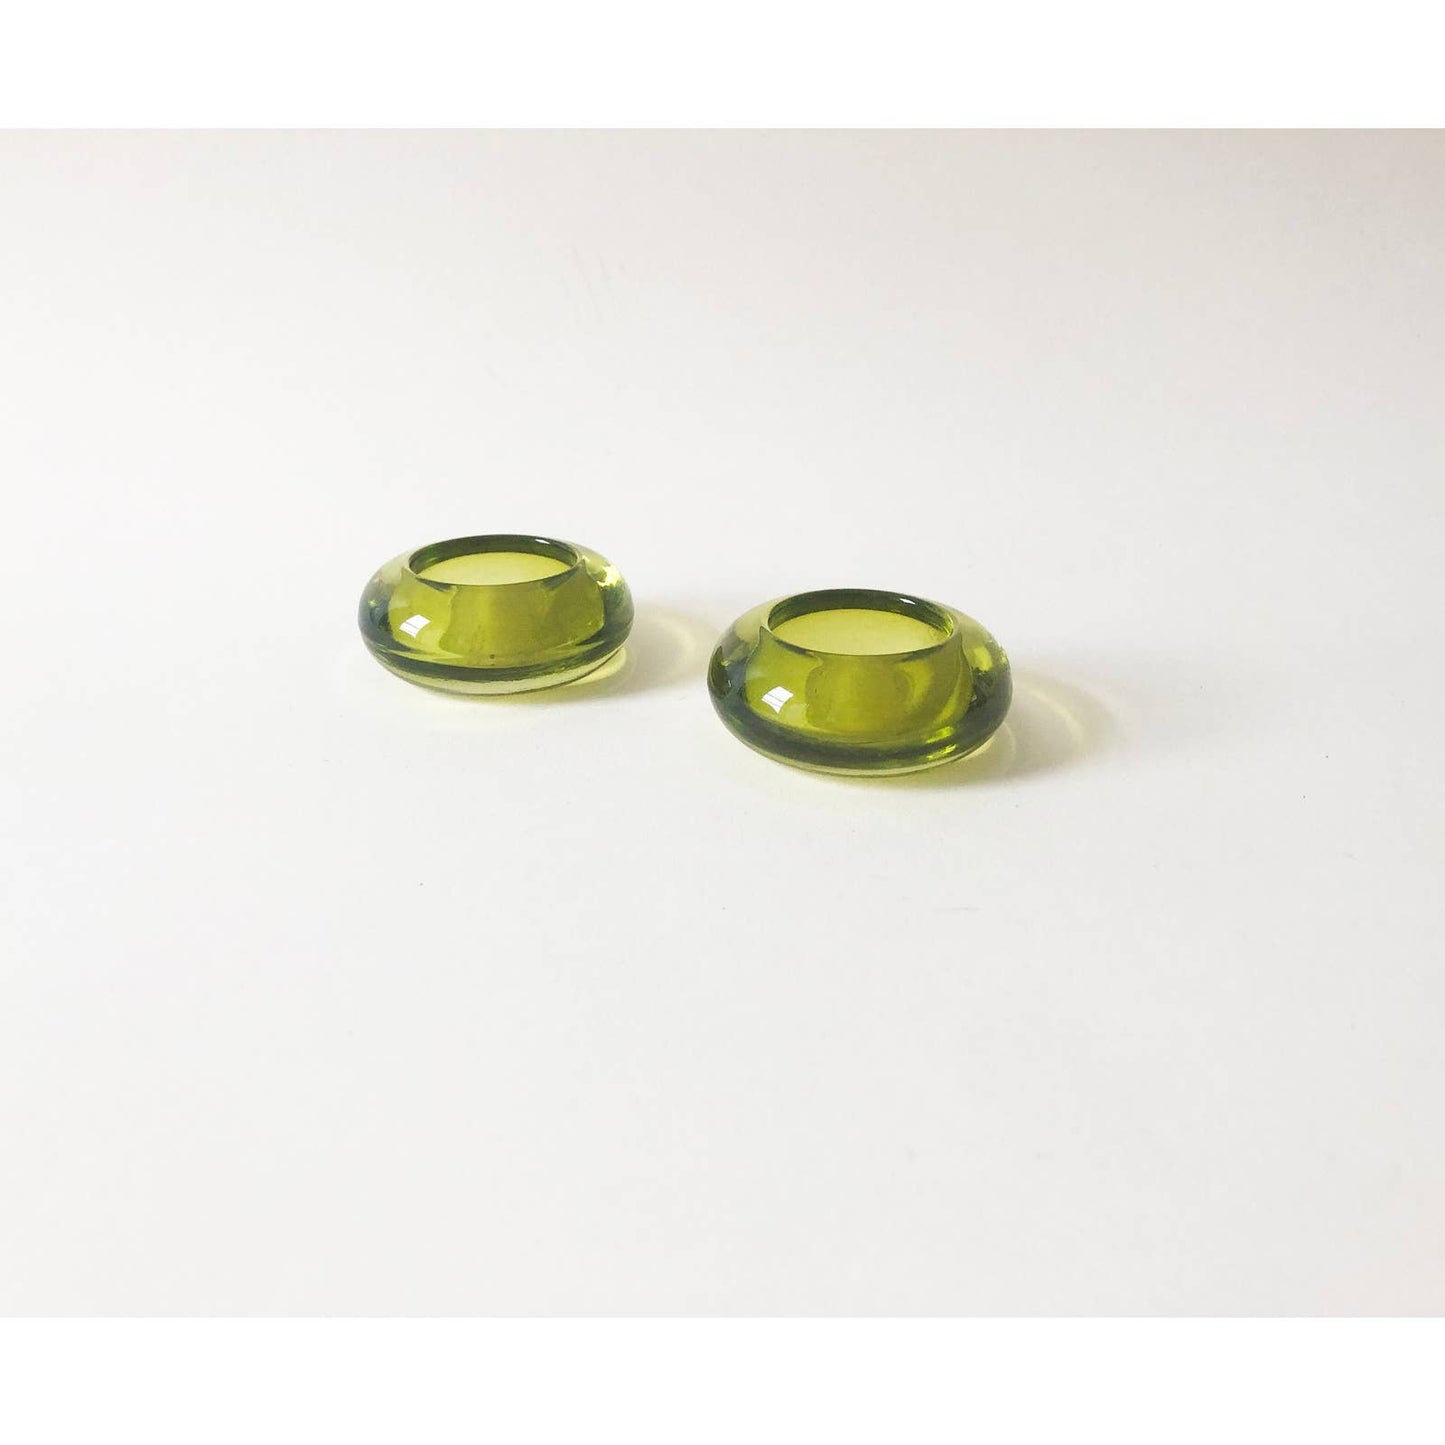 Vintage Neon Green Set of 2 Candle Holders